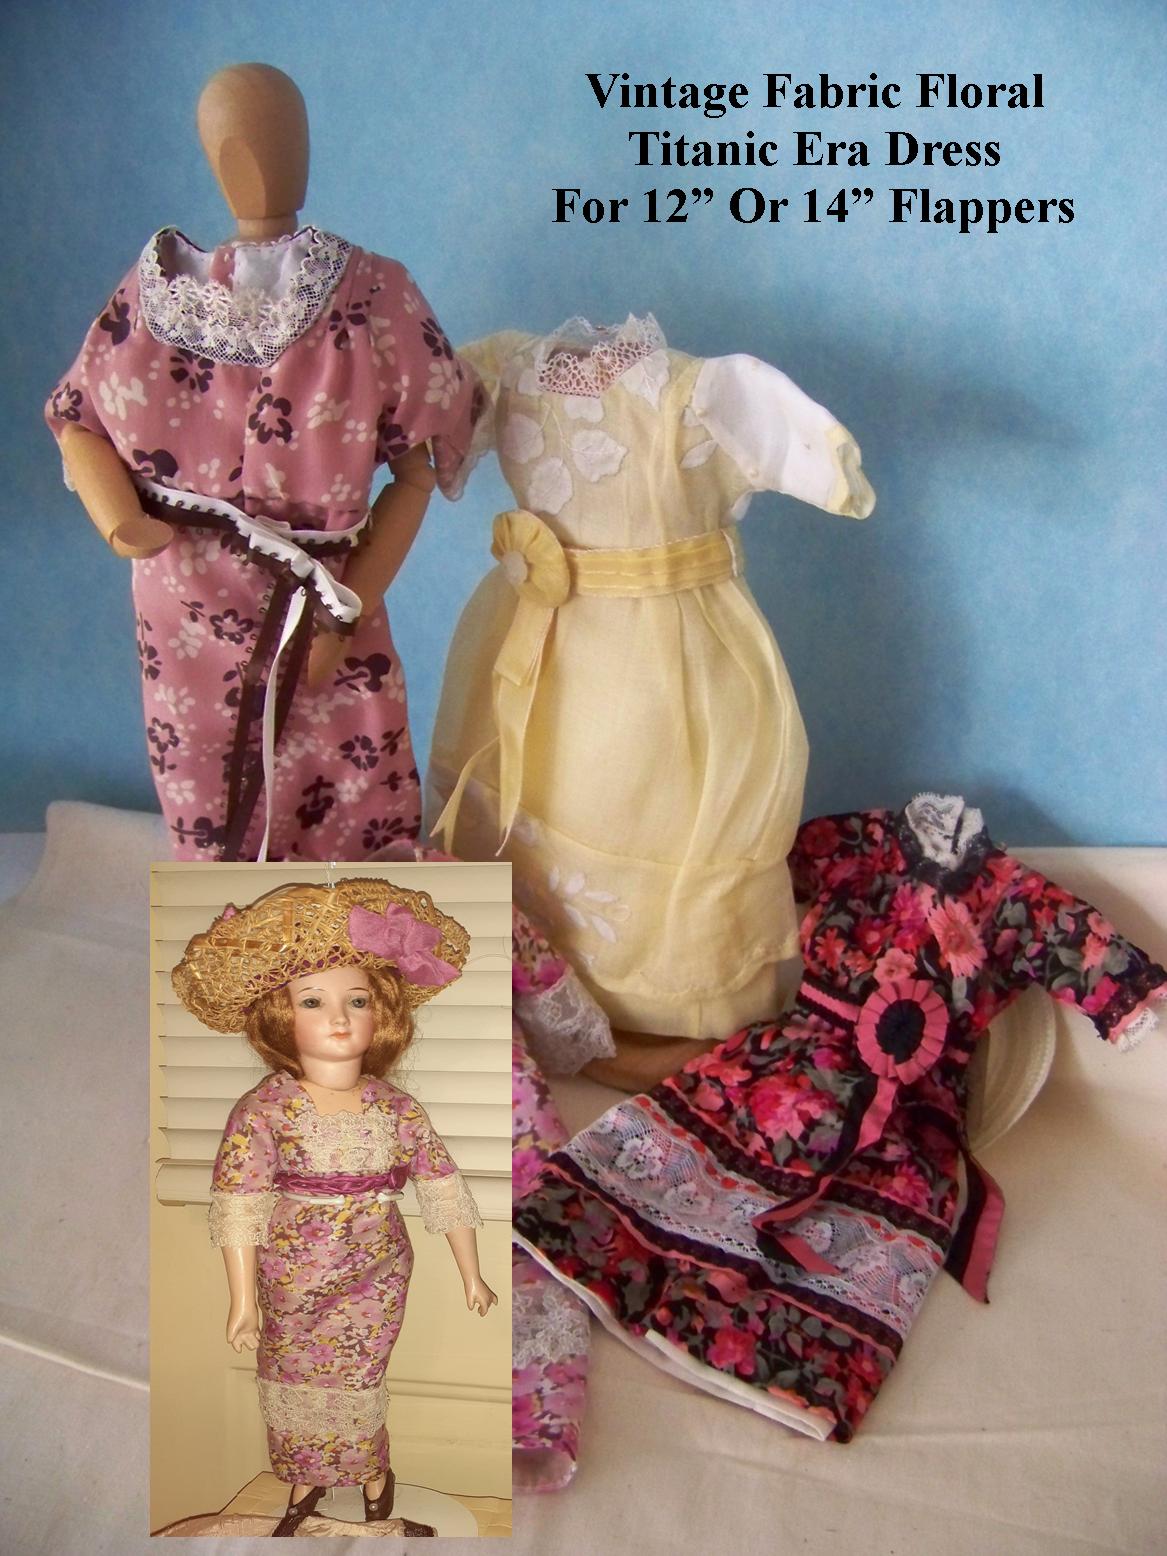 Vintage Floral Fabric Titanic Era Dress for 12" or 14" Flapper Dolls   •   Wednesday, August 3rd, 2:15 pm